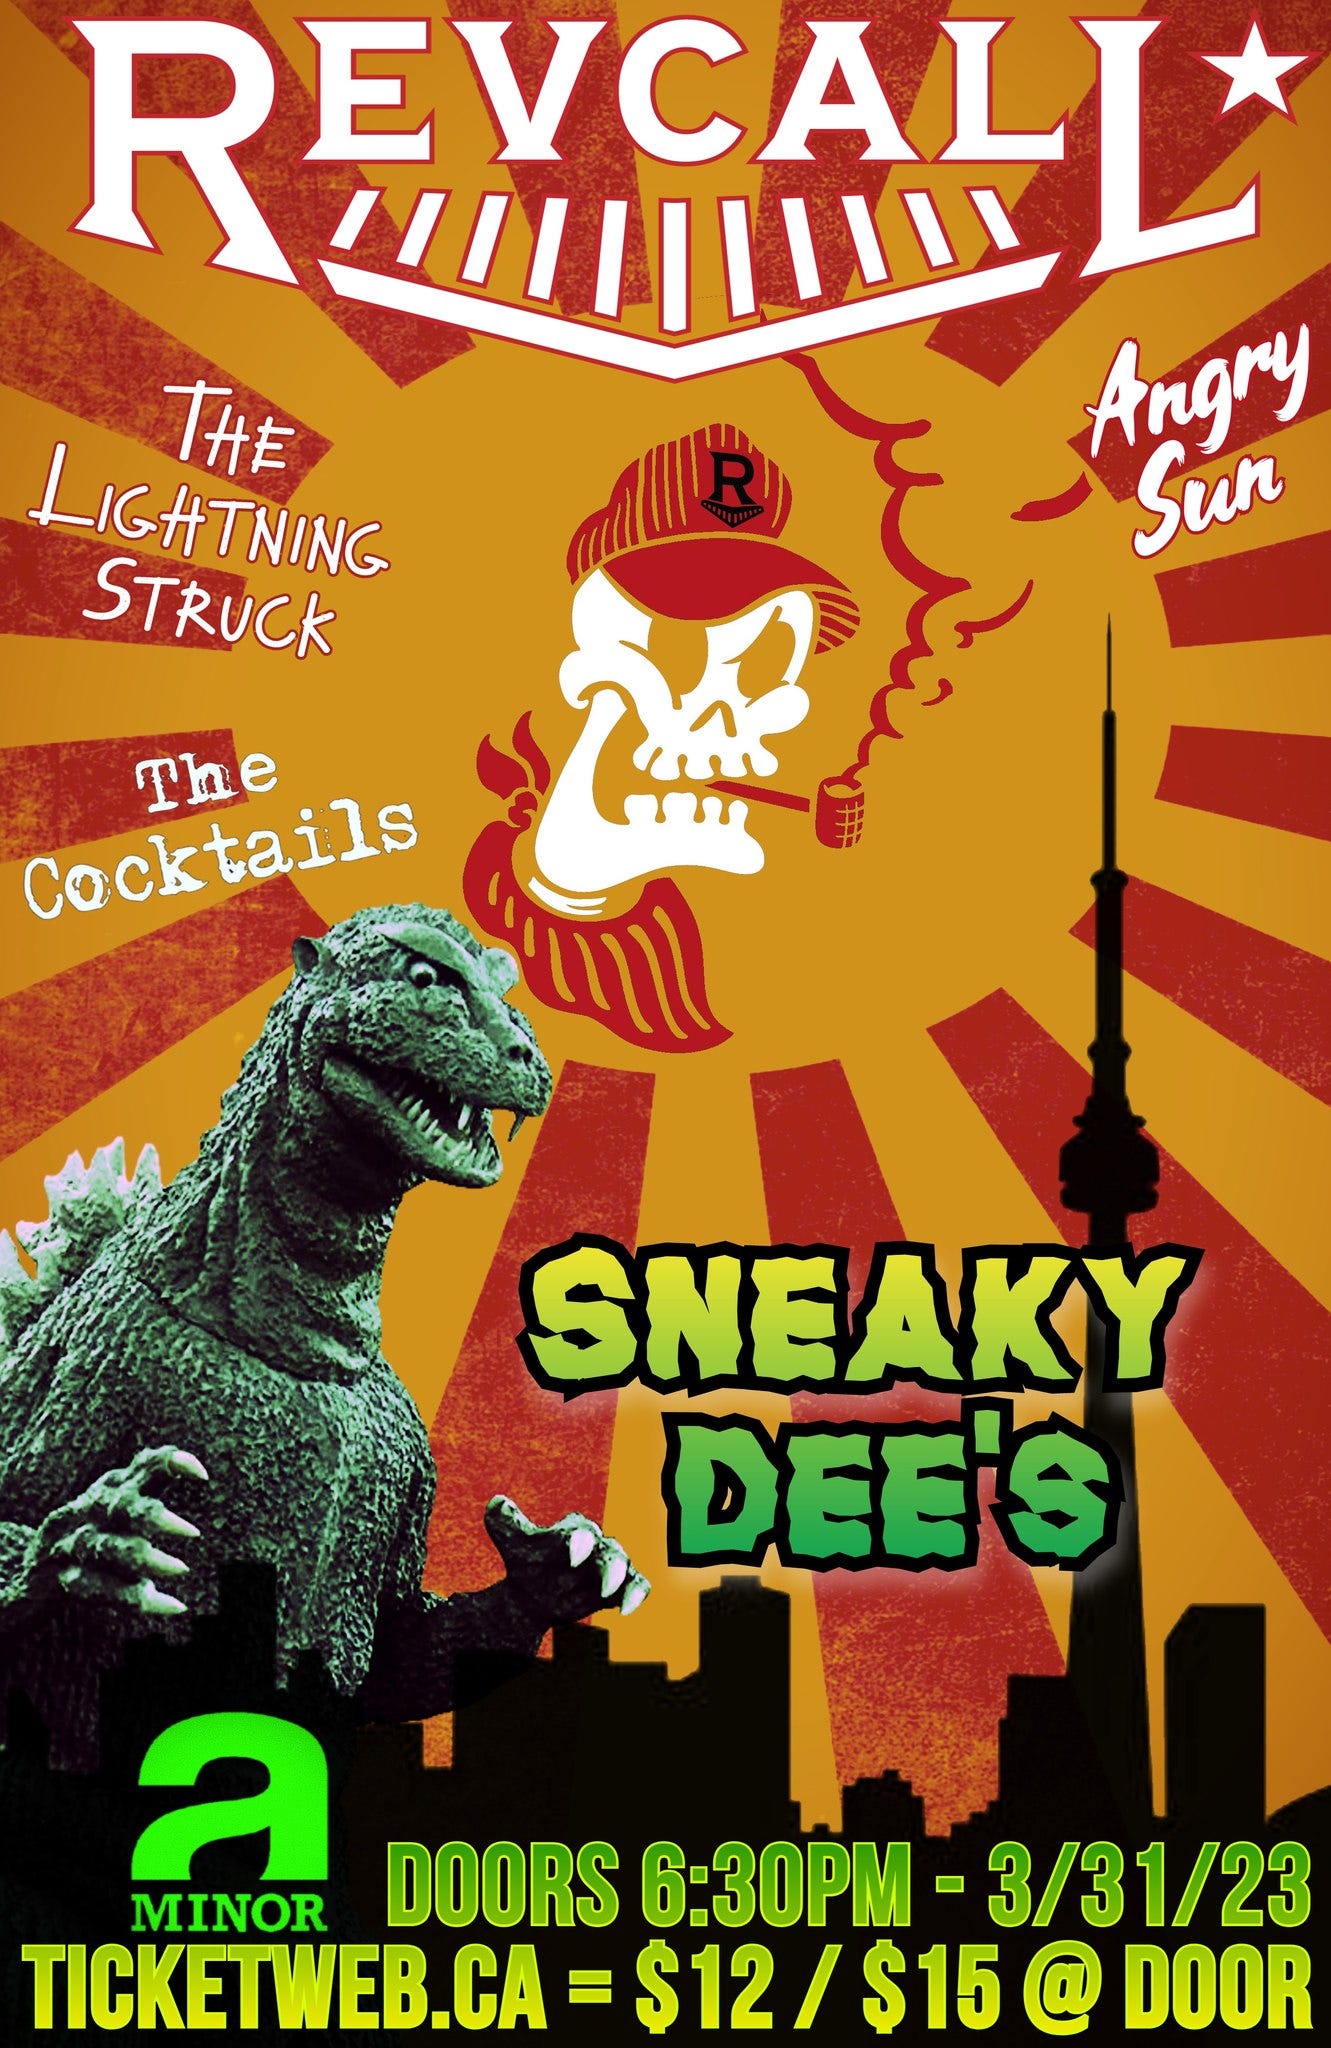 May be a cartoon of text that says 'REYCAL REVCAL Angry LIGHTNING THE Sun STRUCK The Cocktails SNEAKY DEE'S 2 MINOR DOORS 6:30PM 3/31/23 TICKETWEB.CA $12 $15 @ DOOR'